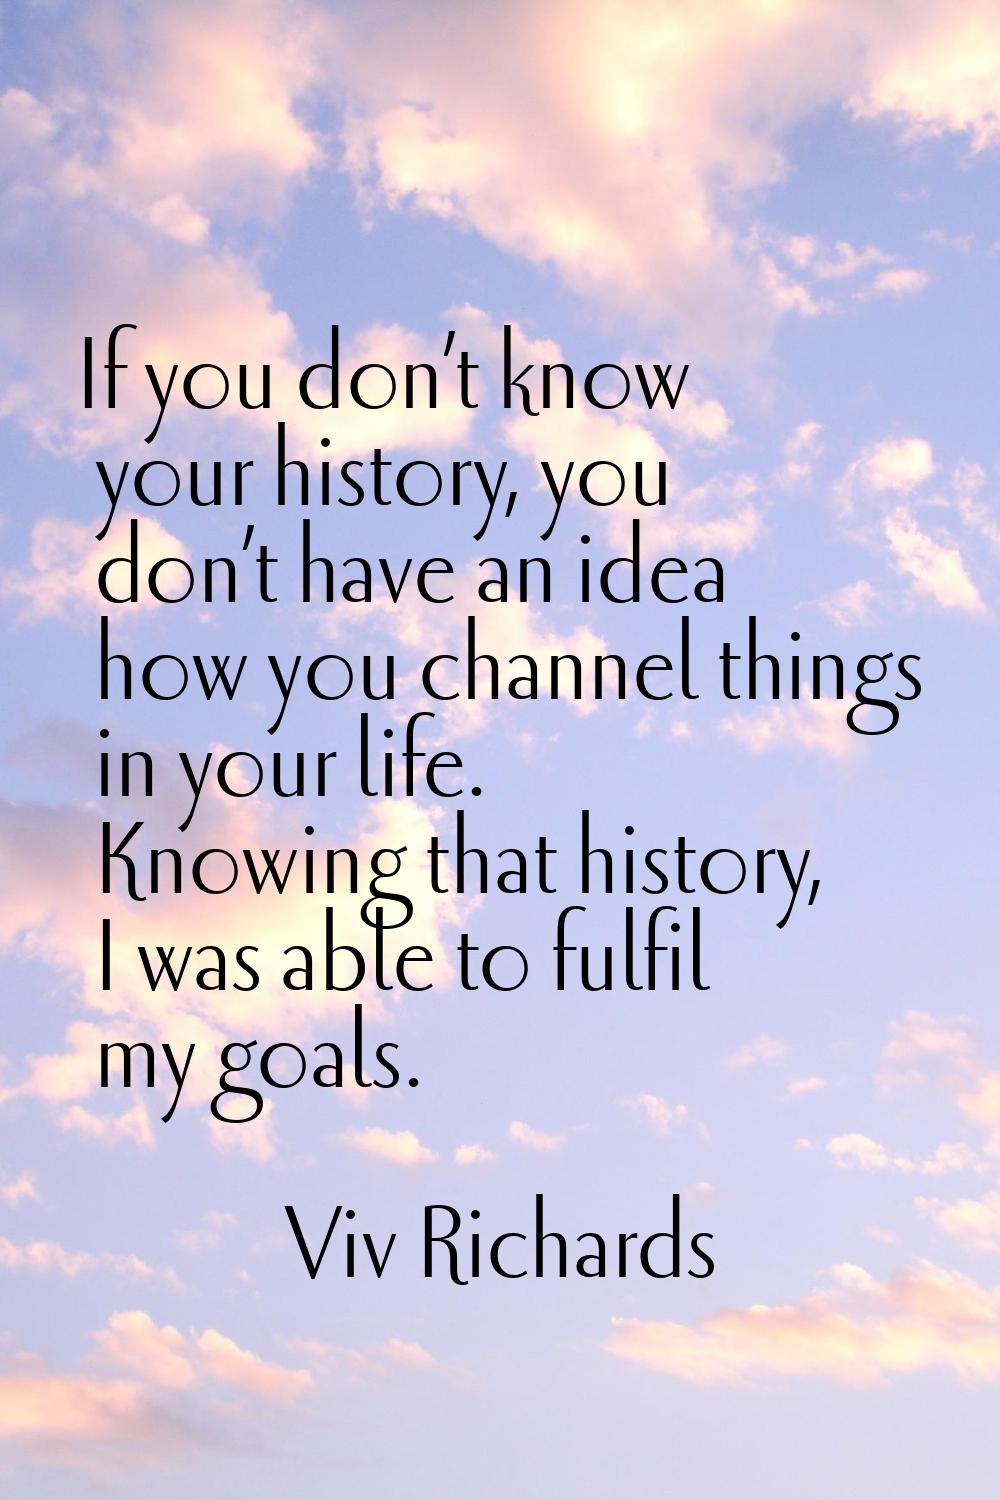 If you don’t know your history, you don’t have an idea how you channel things in your life. Knowing